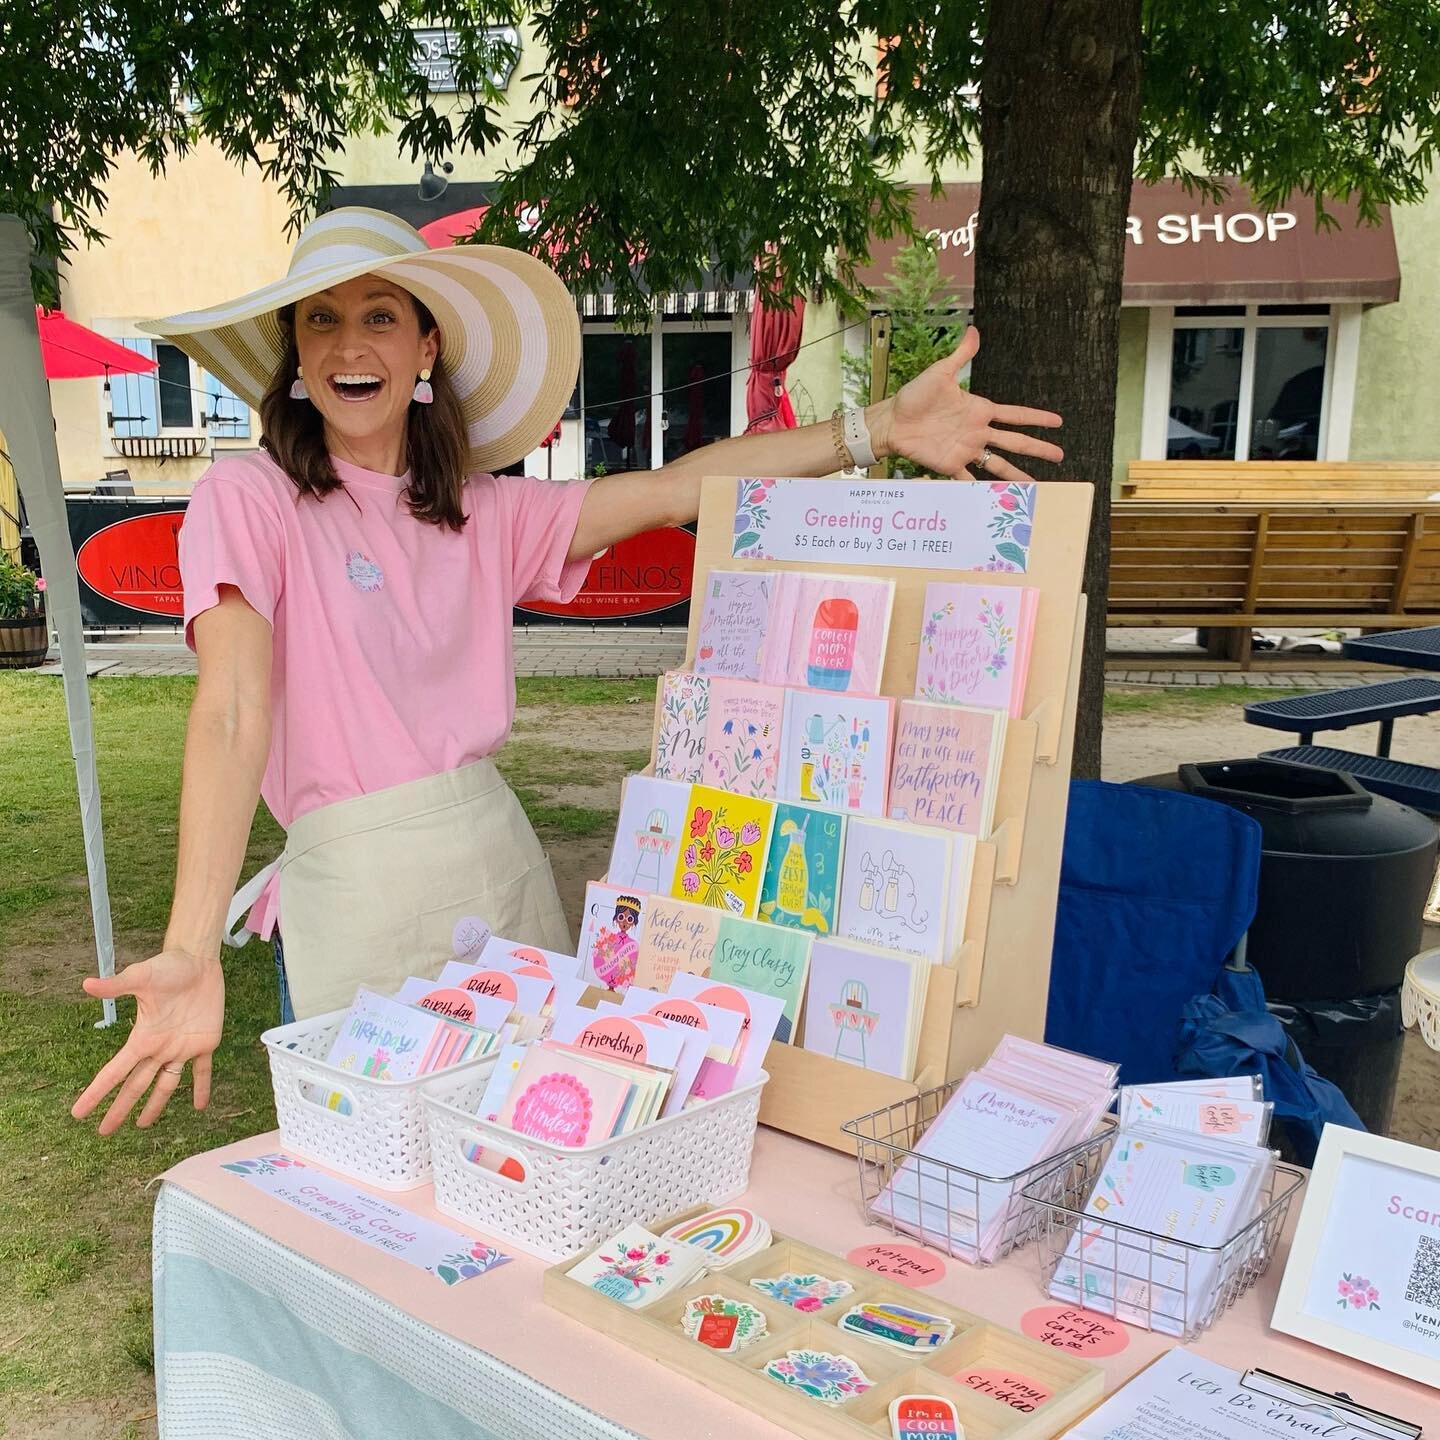 I&rsquo;m out here on this gorgeous day at @lafayettevillage with the @thrivemotherhood pop up market! Oh what fun it is seeing vendor friends and meeting new friends! If you&rsquo;re in north Raleigh, come see me and then grab a coffee from @jubalac